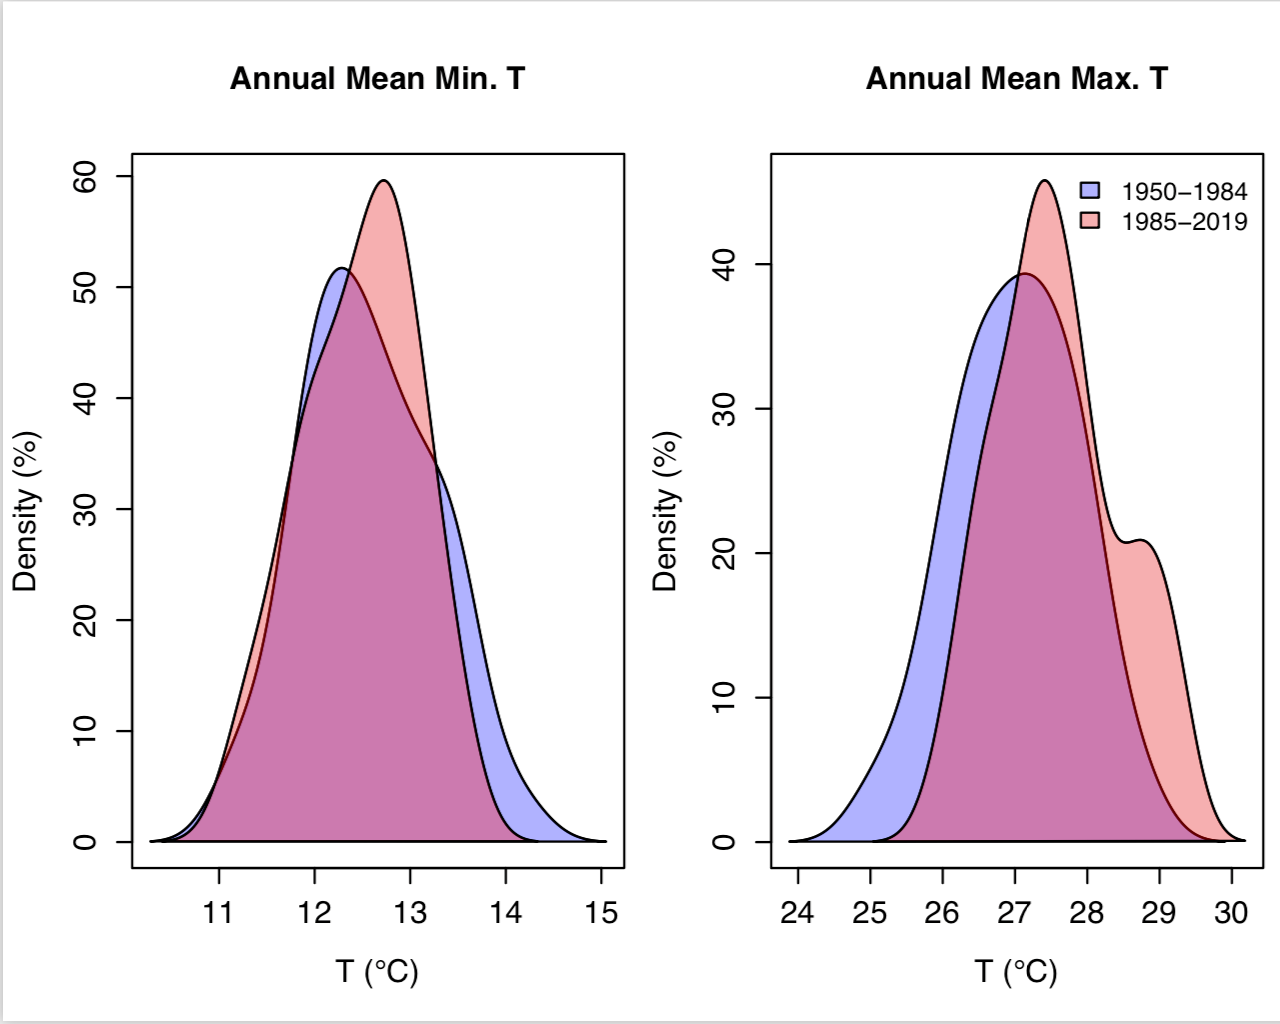 This graph shows the probability distributions of mean annual minimum temperature (left) and mean annual maximum temperatures (right) for Walgett for two periods,  1950 to 1984 and 1985 to 2019.